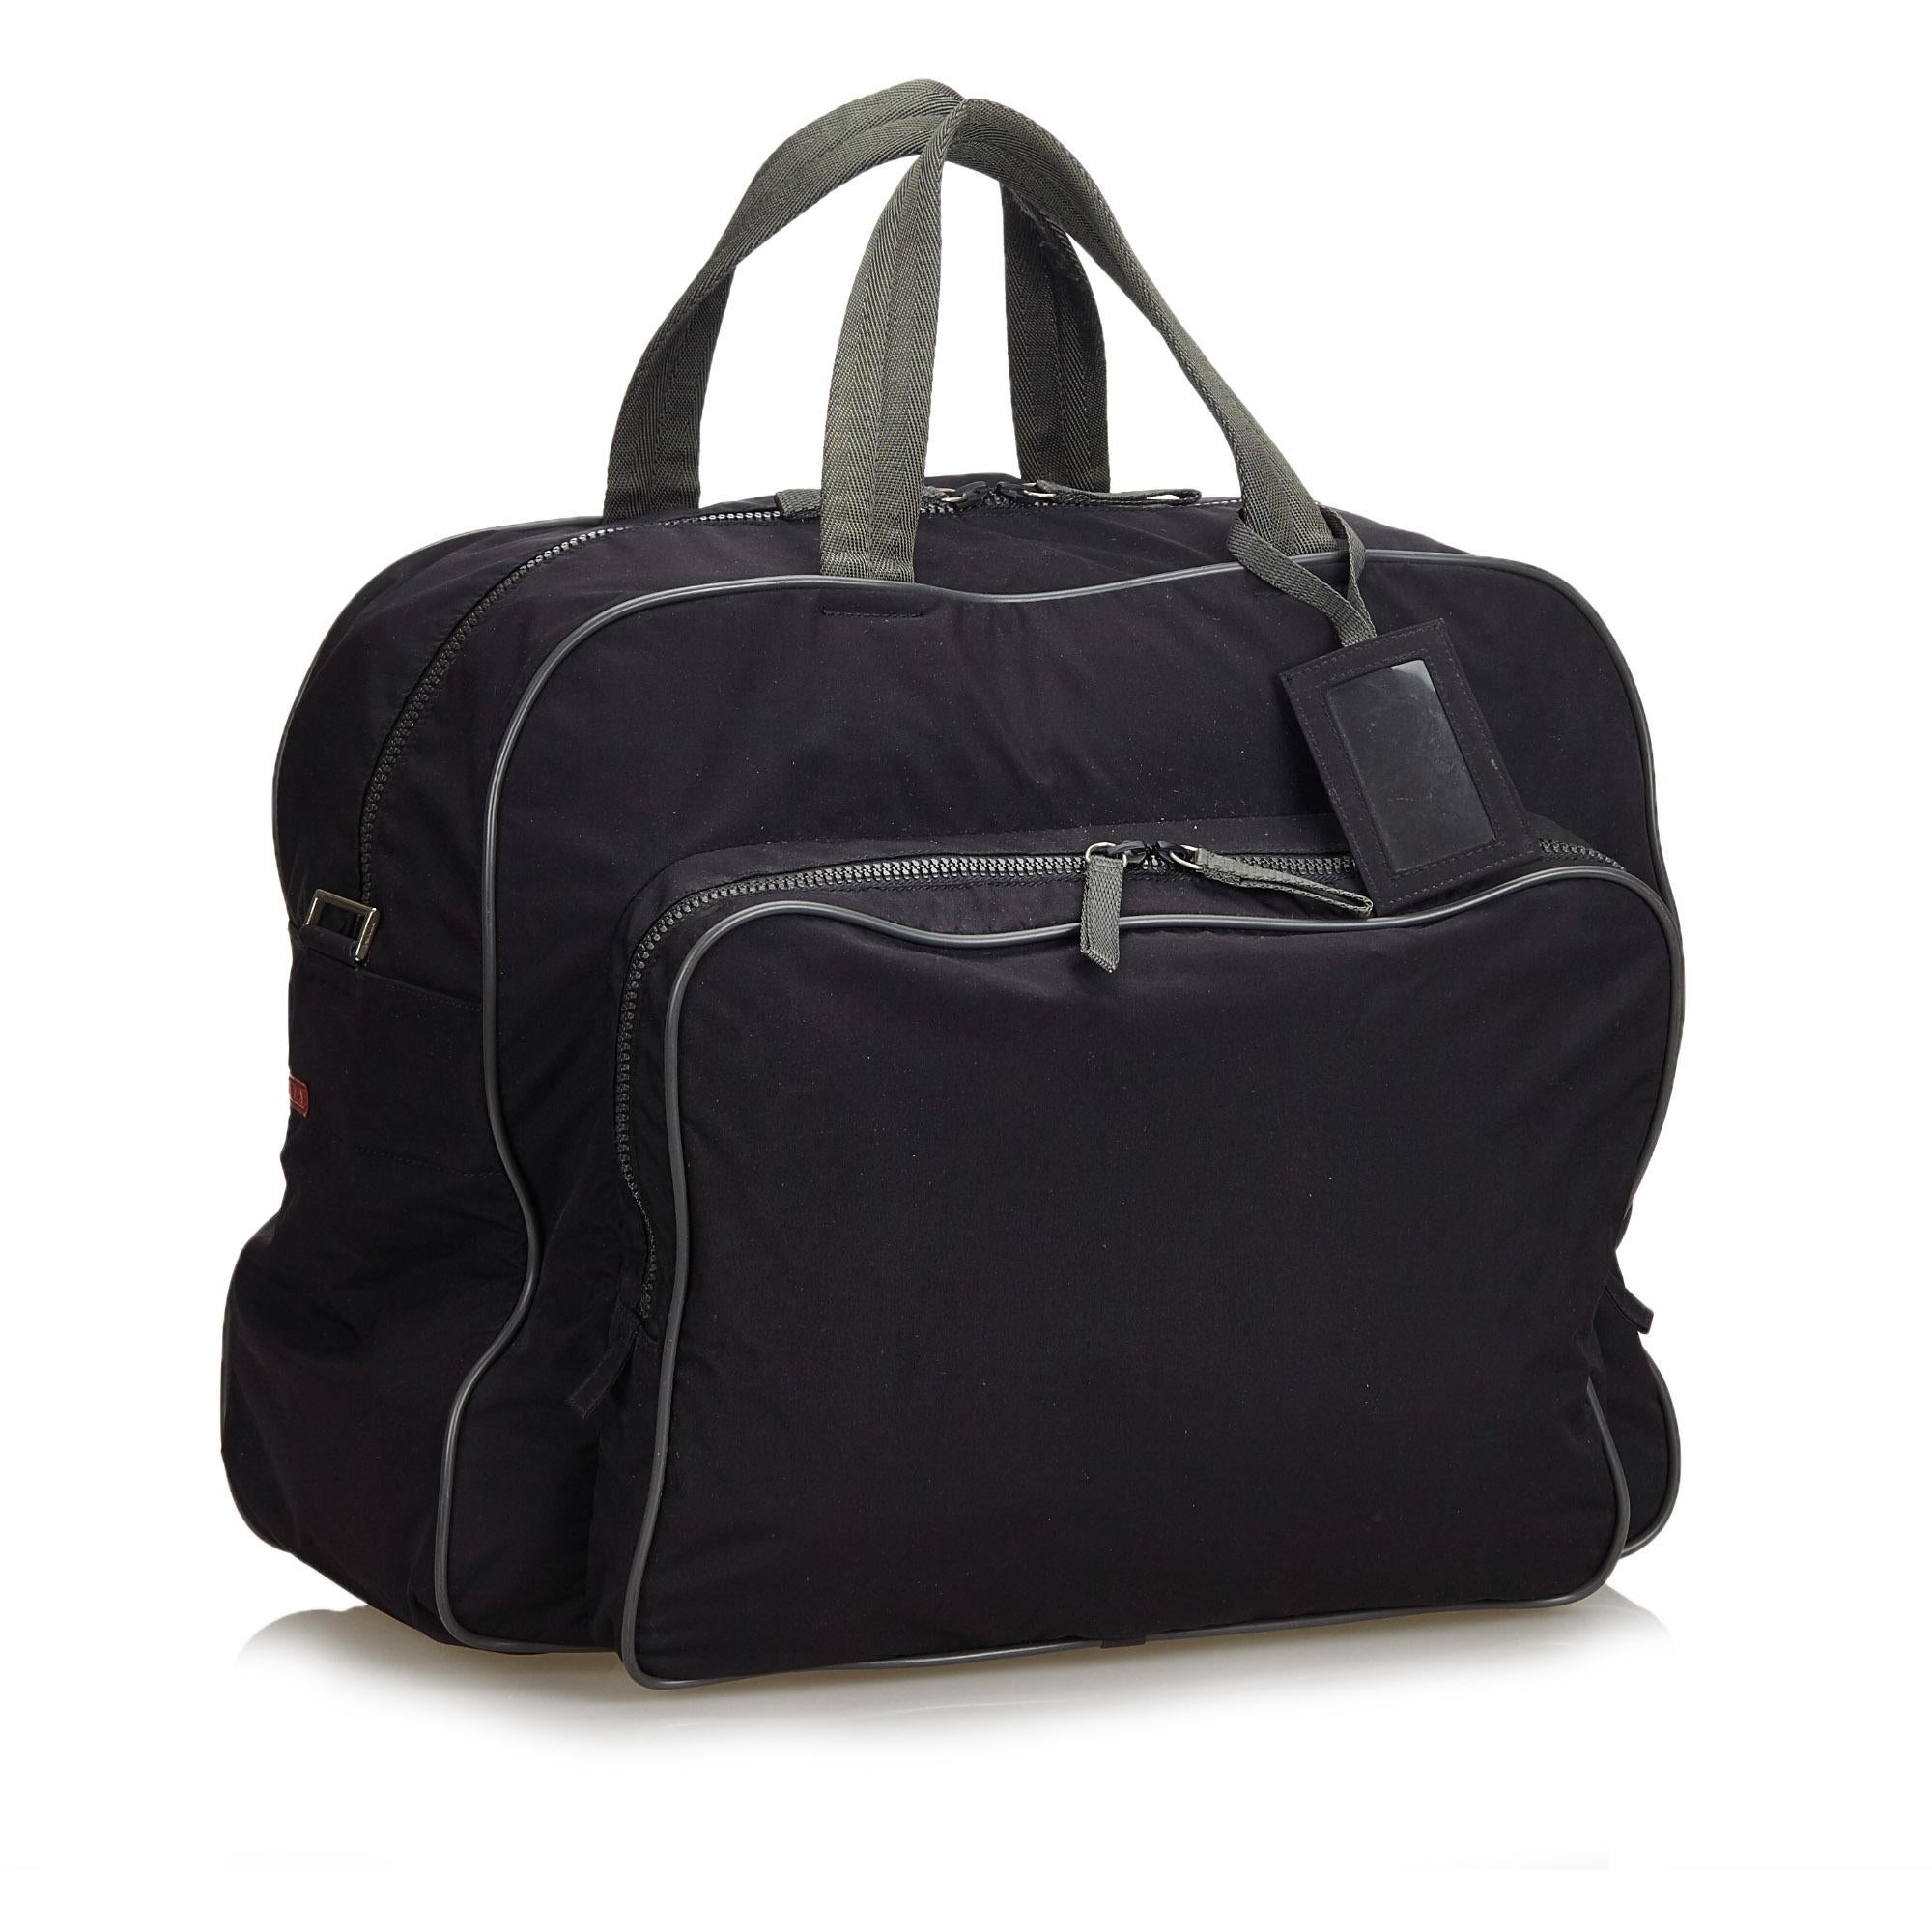 This duffle bag features a fabric body with leather trim, a front exterior zip compartment, flat handles with a luggage tag, a detachable flat strap, a top zip closure and interior zip and slip pockets. It carries as AB condition